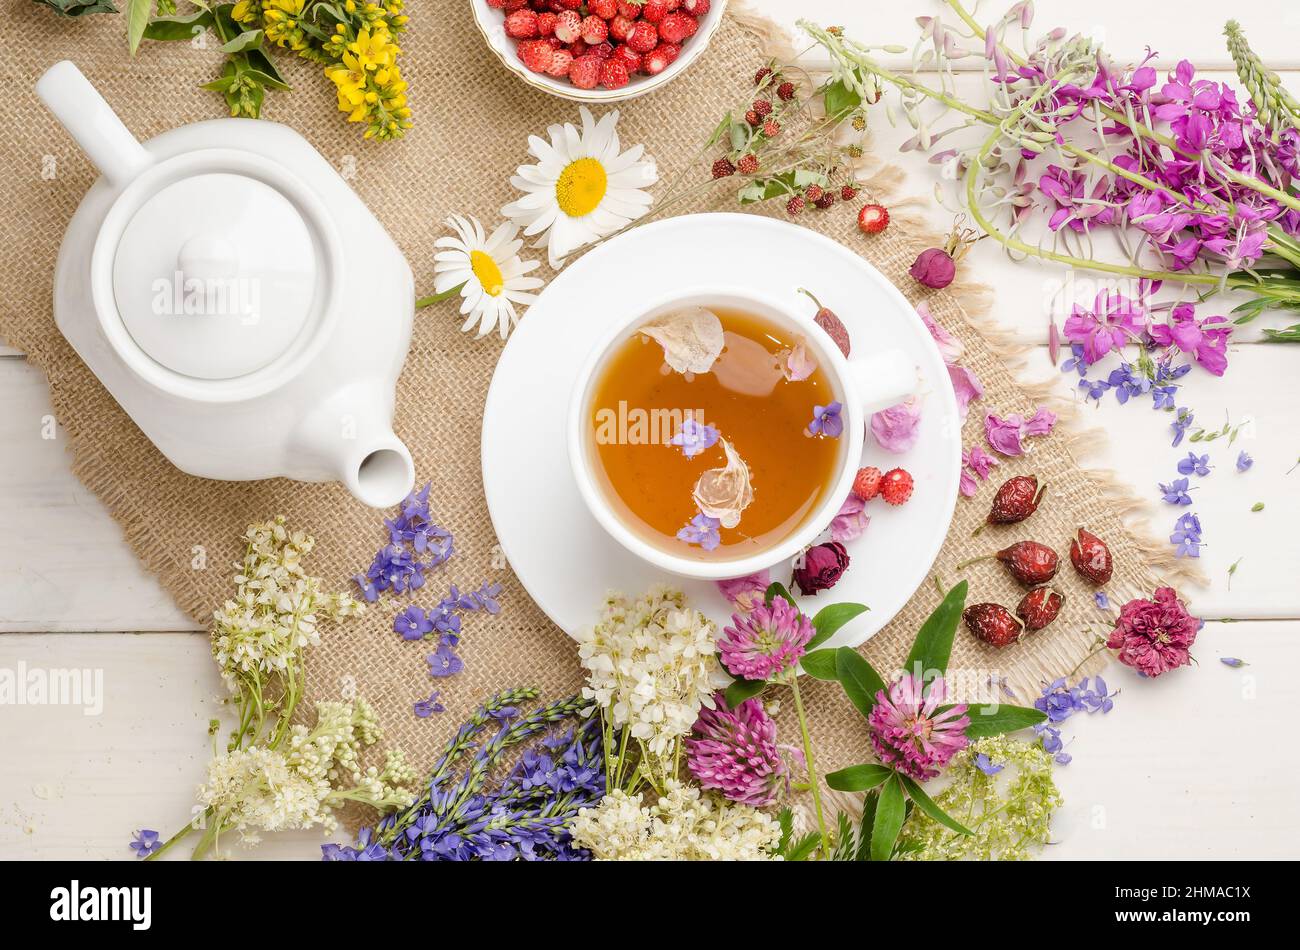 Herbal tea with rosehip, chamomile and meadowsweet in a white cup on a white wooden table with flowers, flat lay Stock Photo